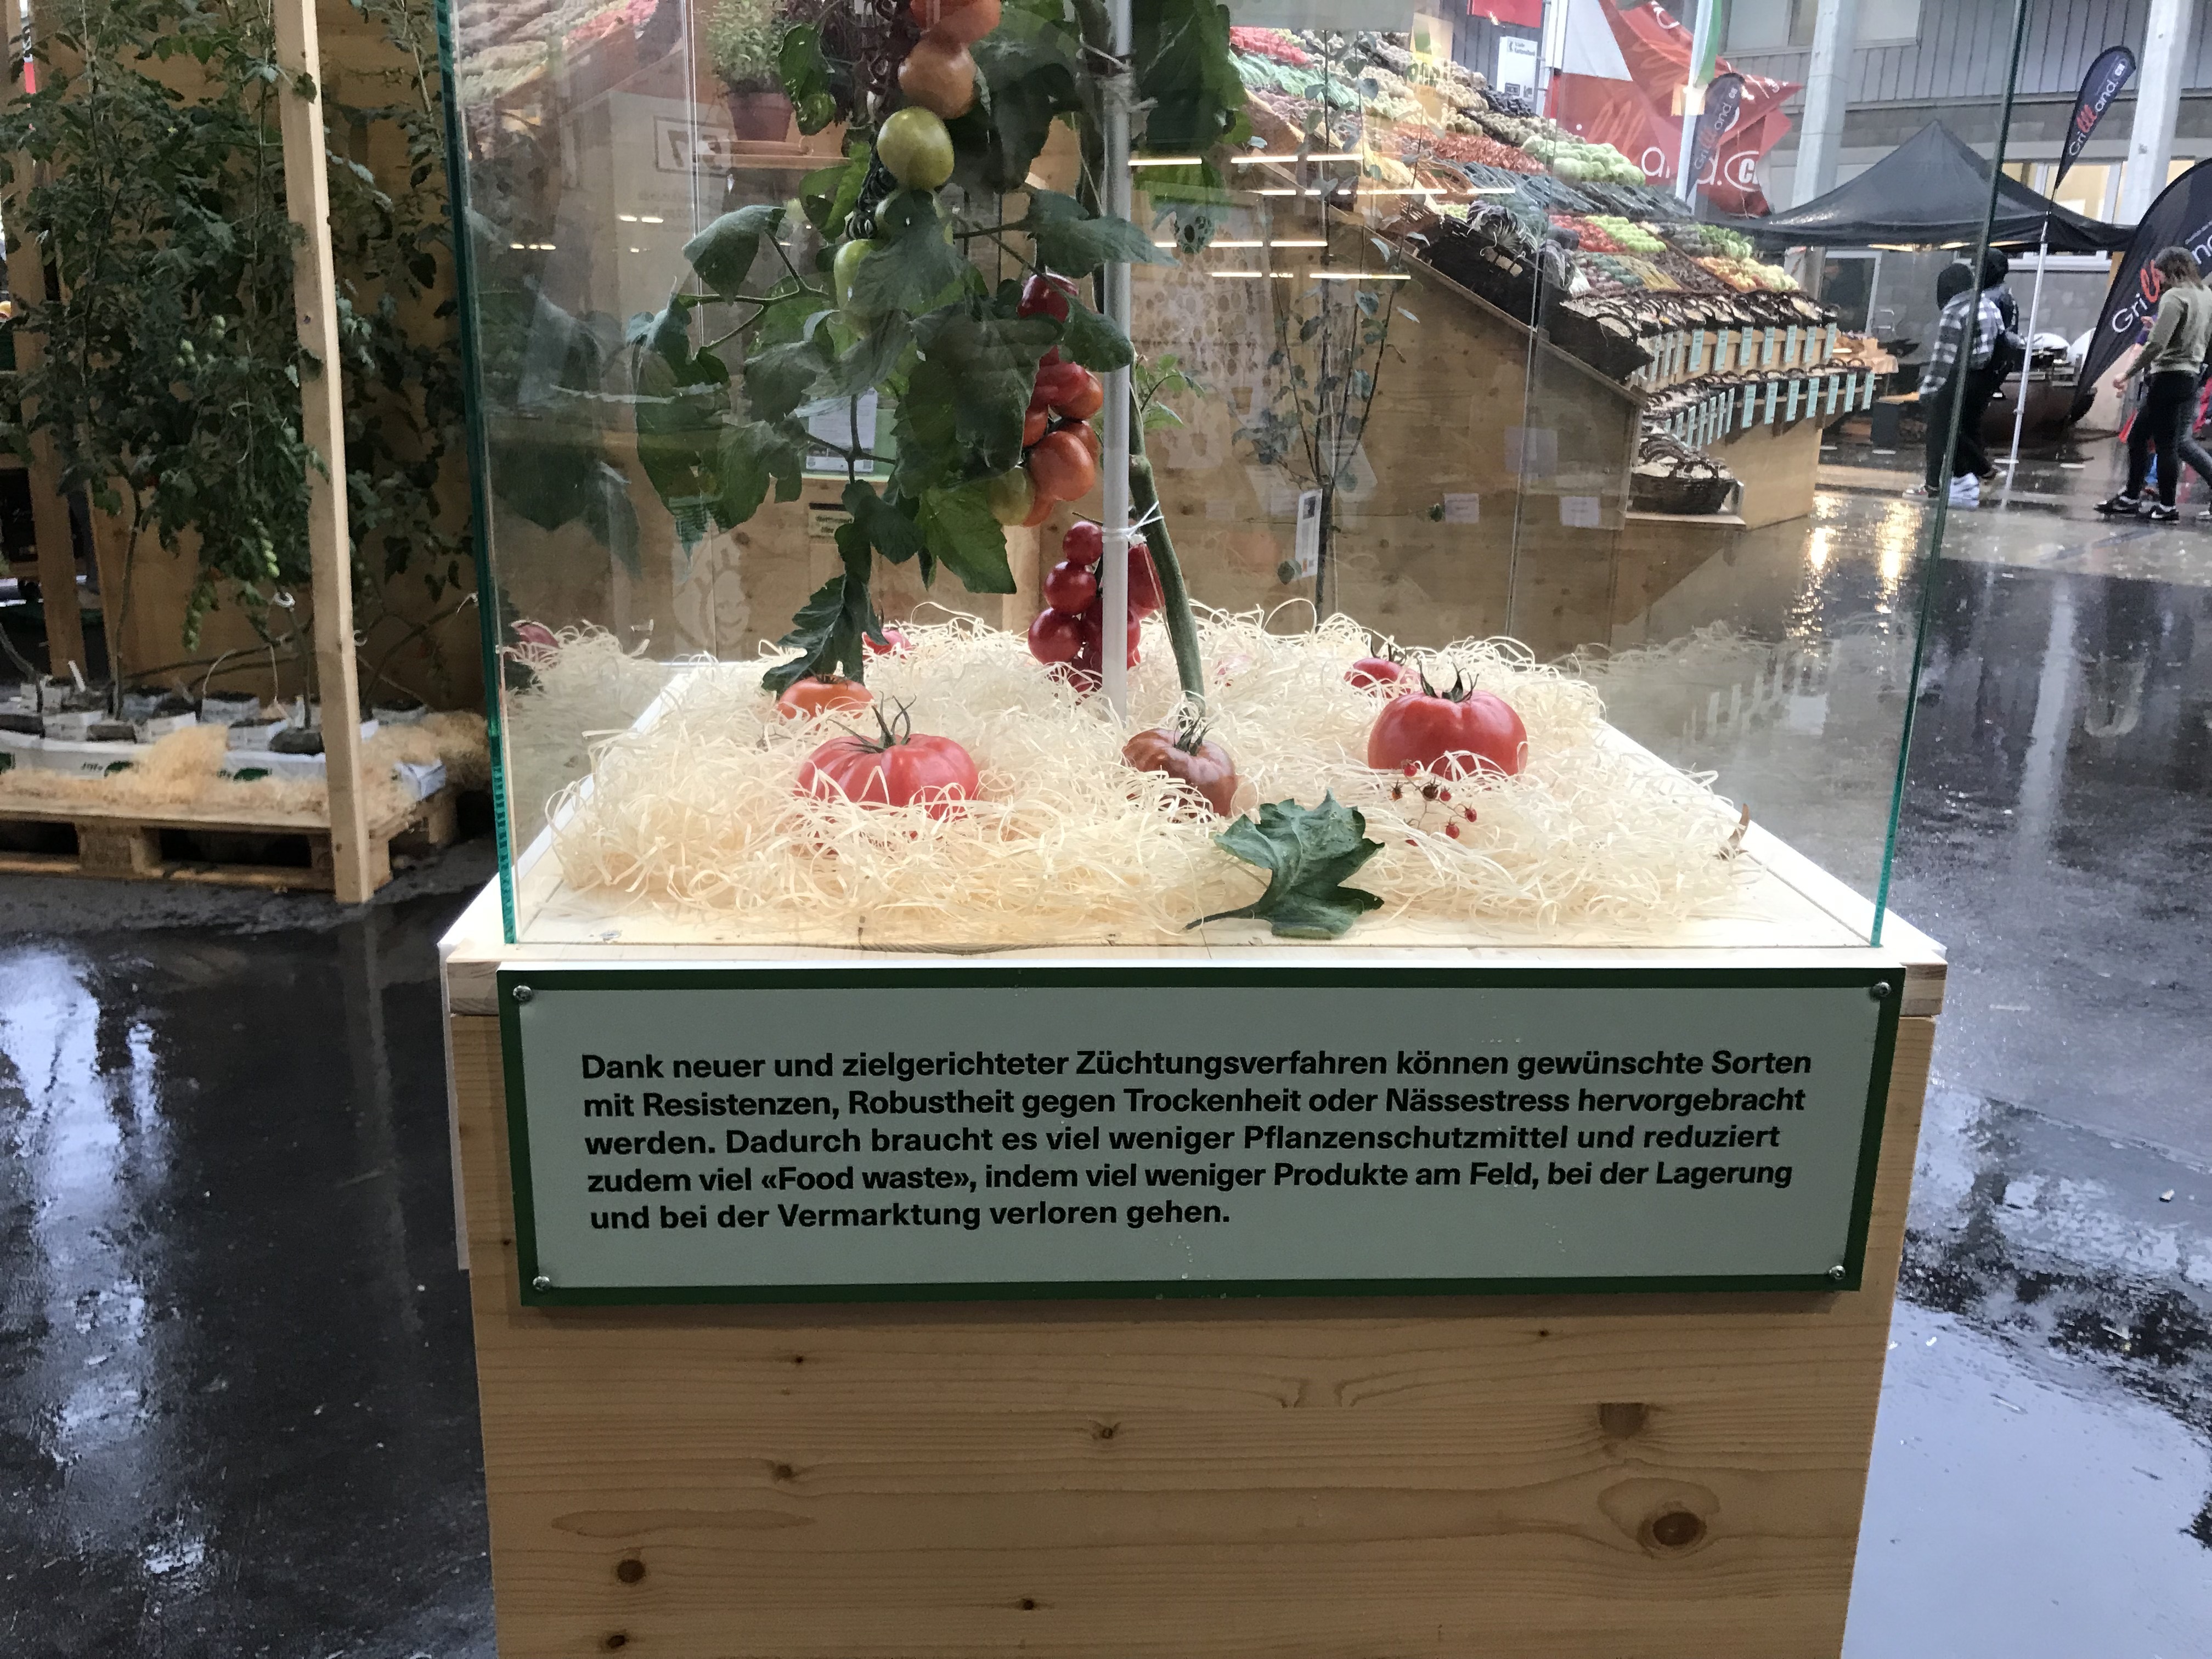 The Vegetable Association used exhibition models like this one to draw attention to the benefits of new breeding technologies at Olma 2023.